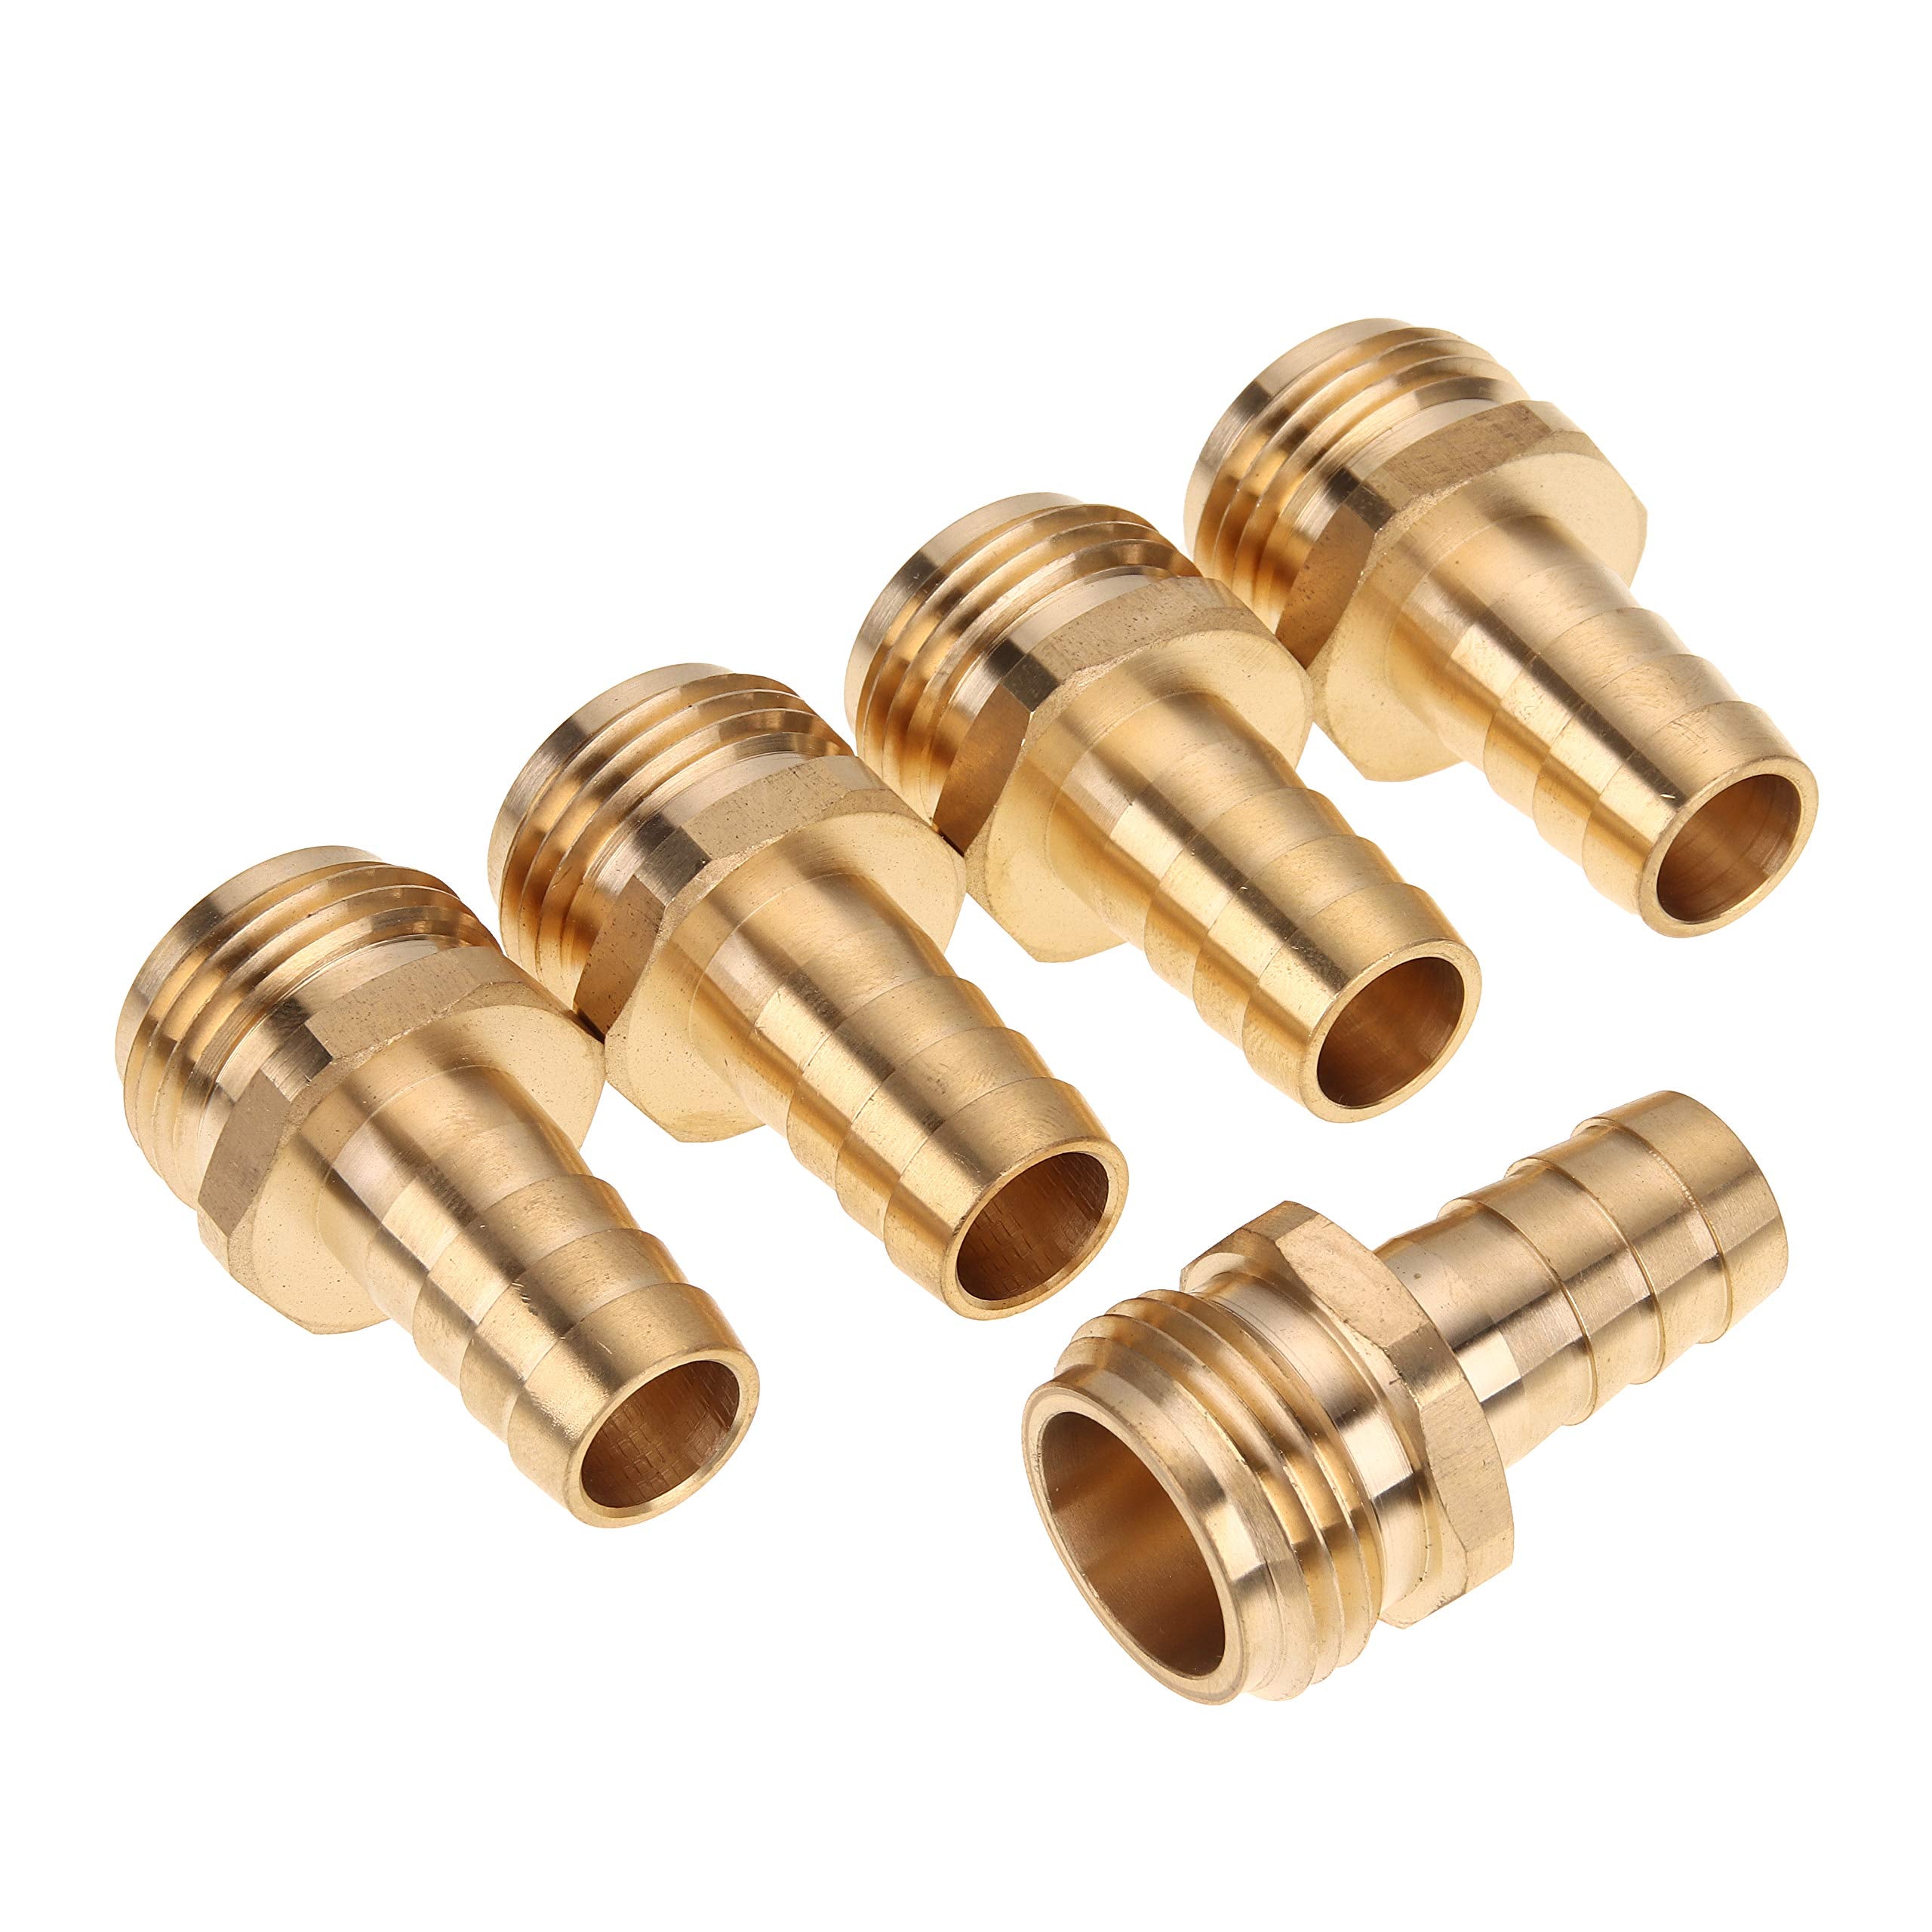 LTWFITTING Brass 5/8 Inch Barb x 3/4 Inch MHT Hose Repair/Connector,Garden Hose Fitting(Pack of 5)